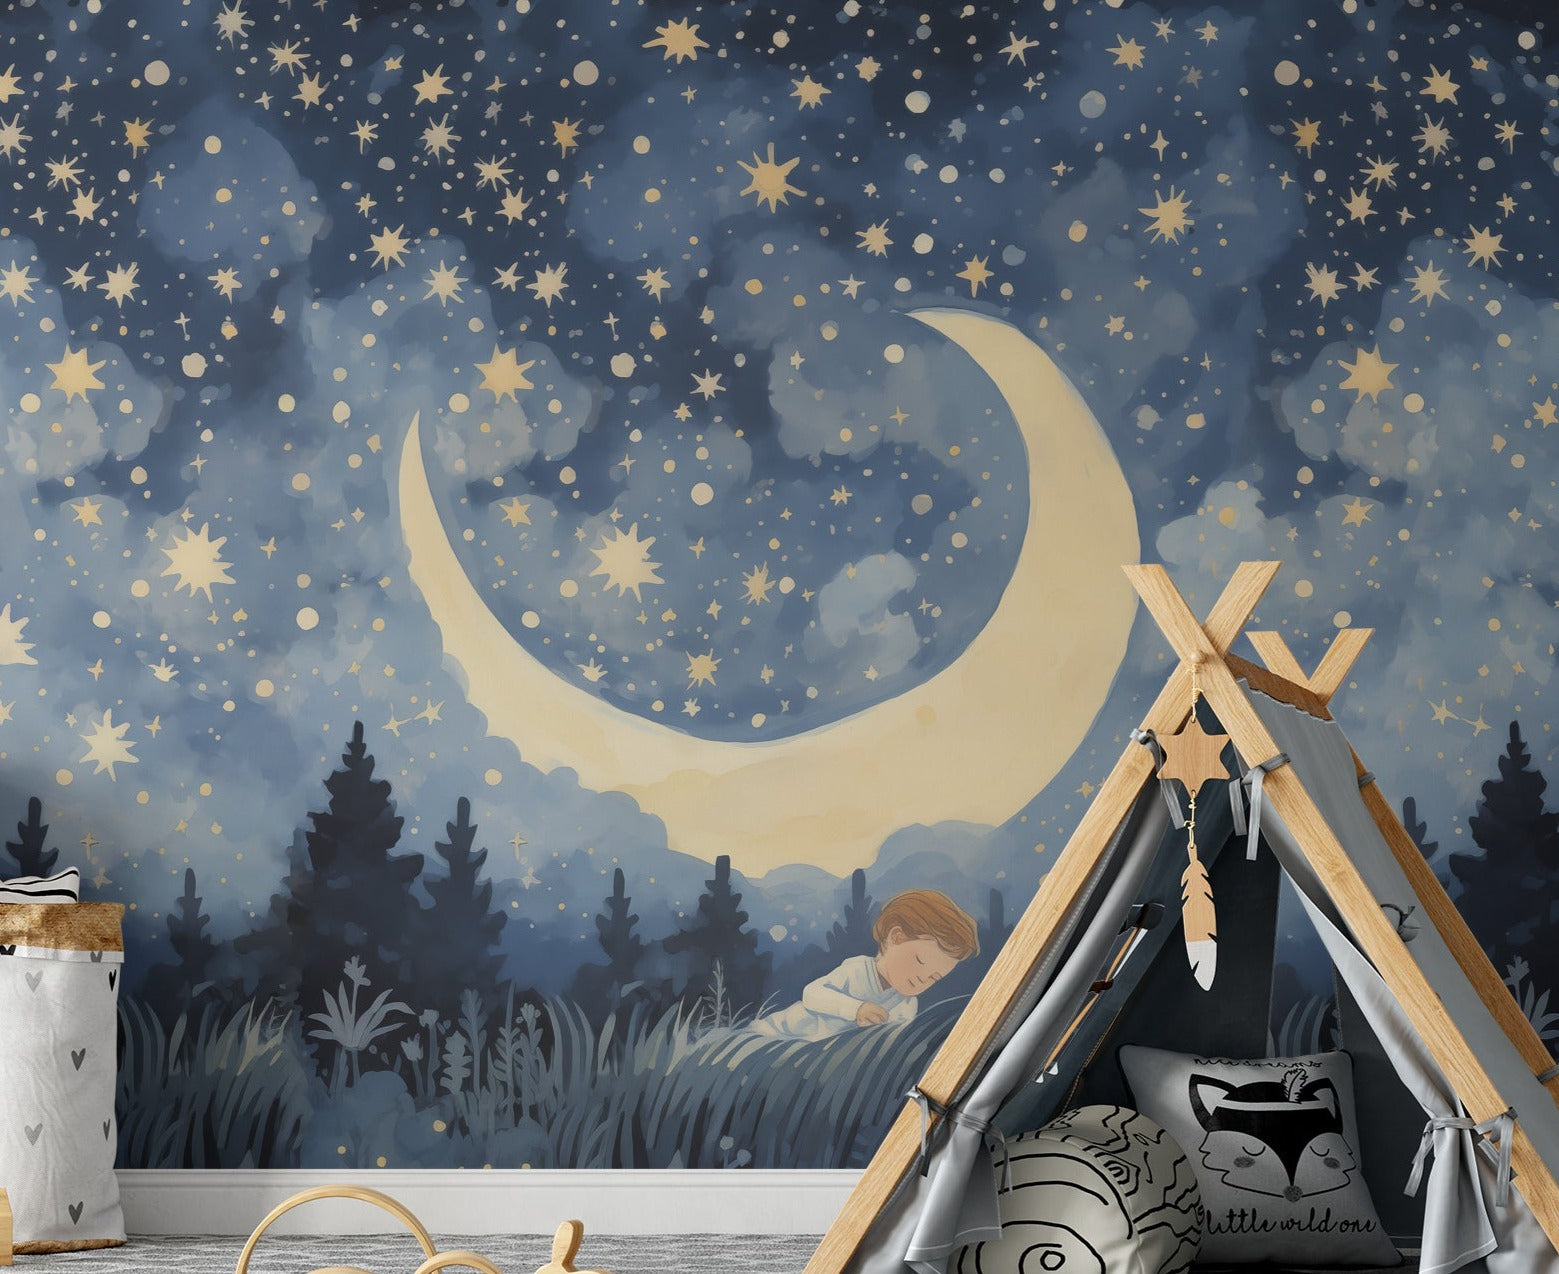 Starry night mural with crescent moon in a playful child's room with teepee and toys